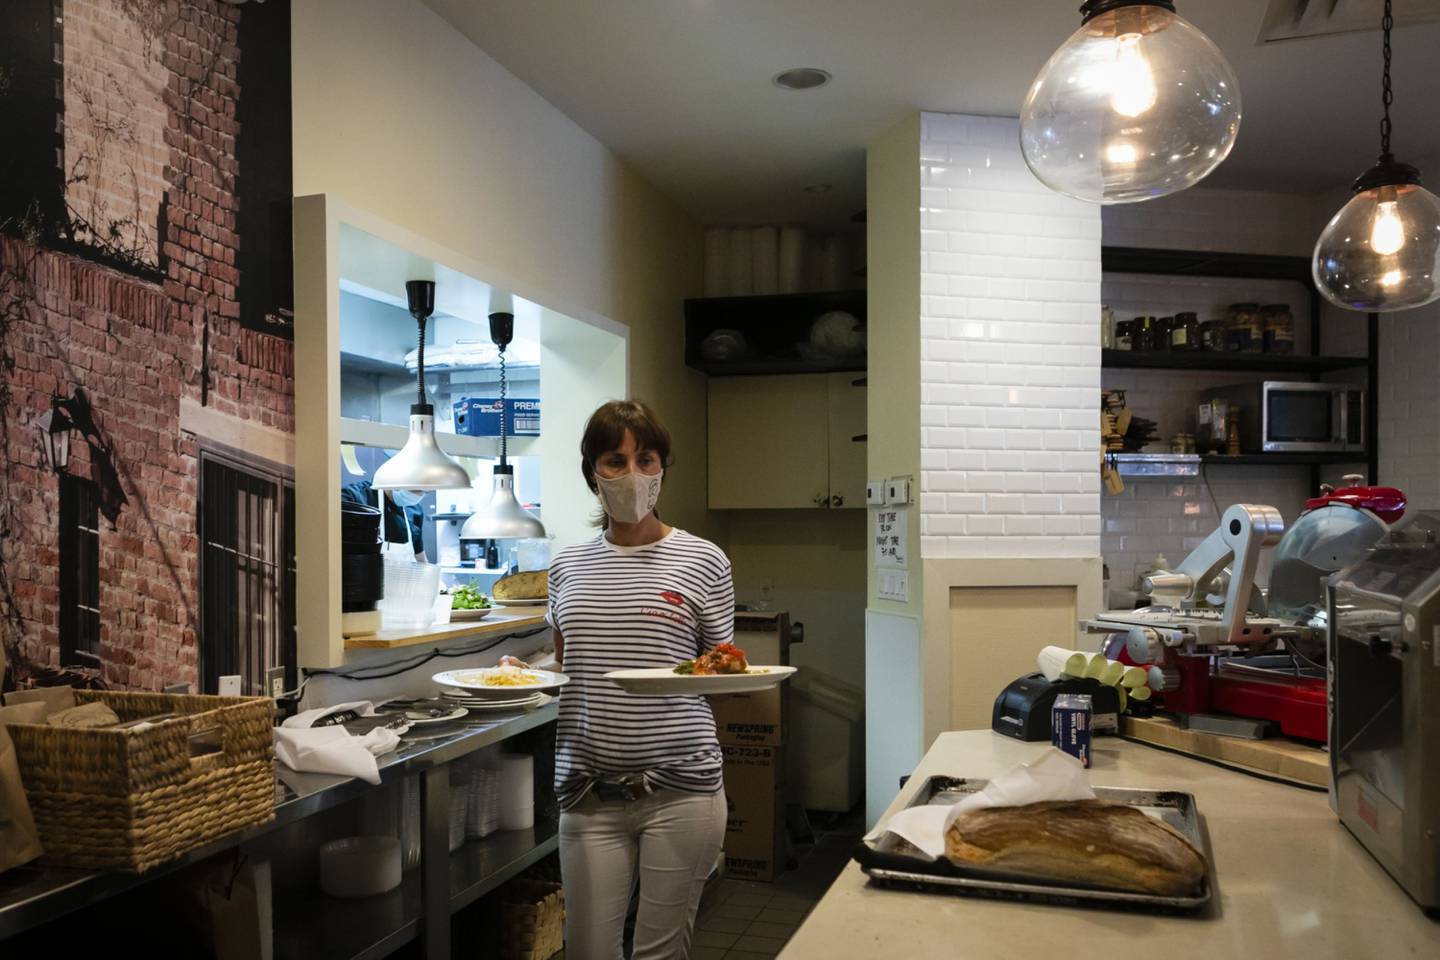 An employee wears a protective mask while serving food at a restaurant in Miami, Florida, U.S.